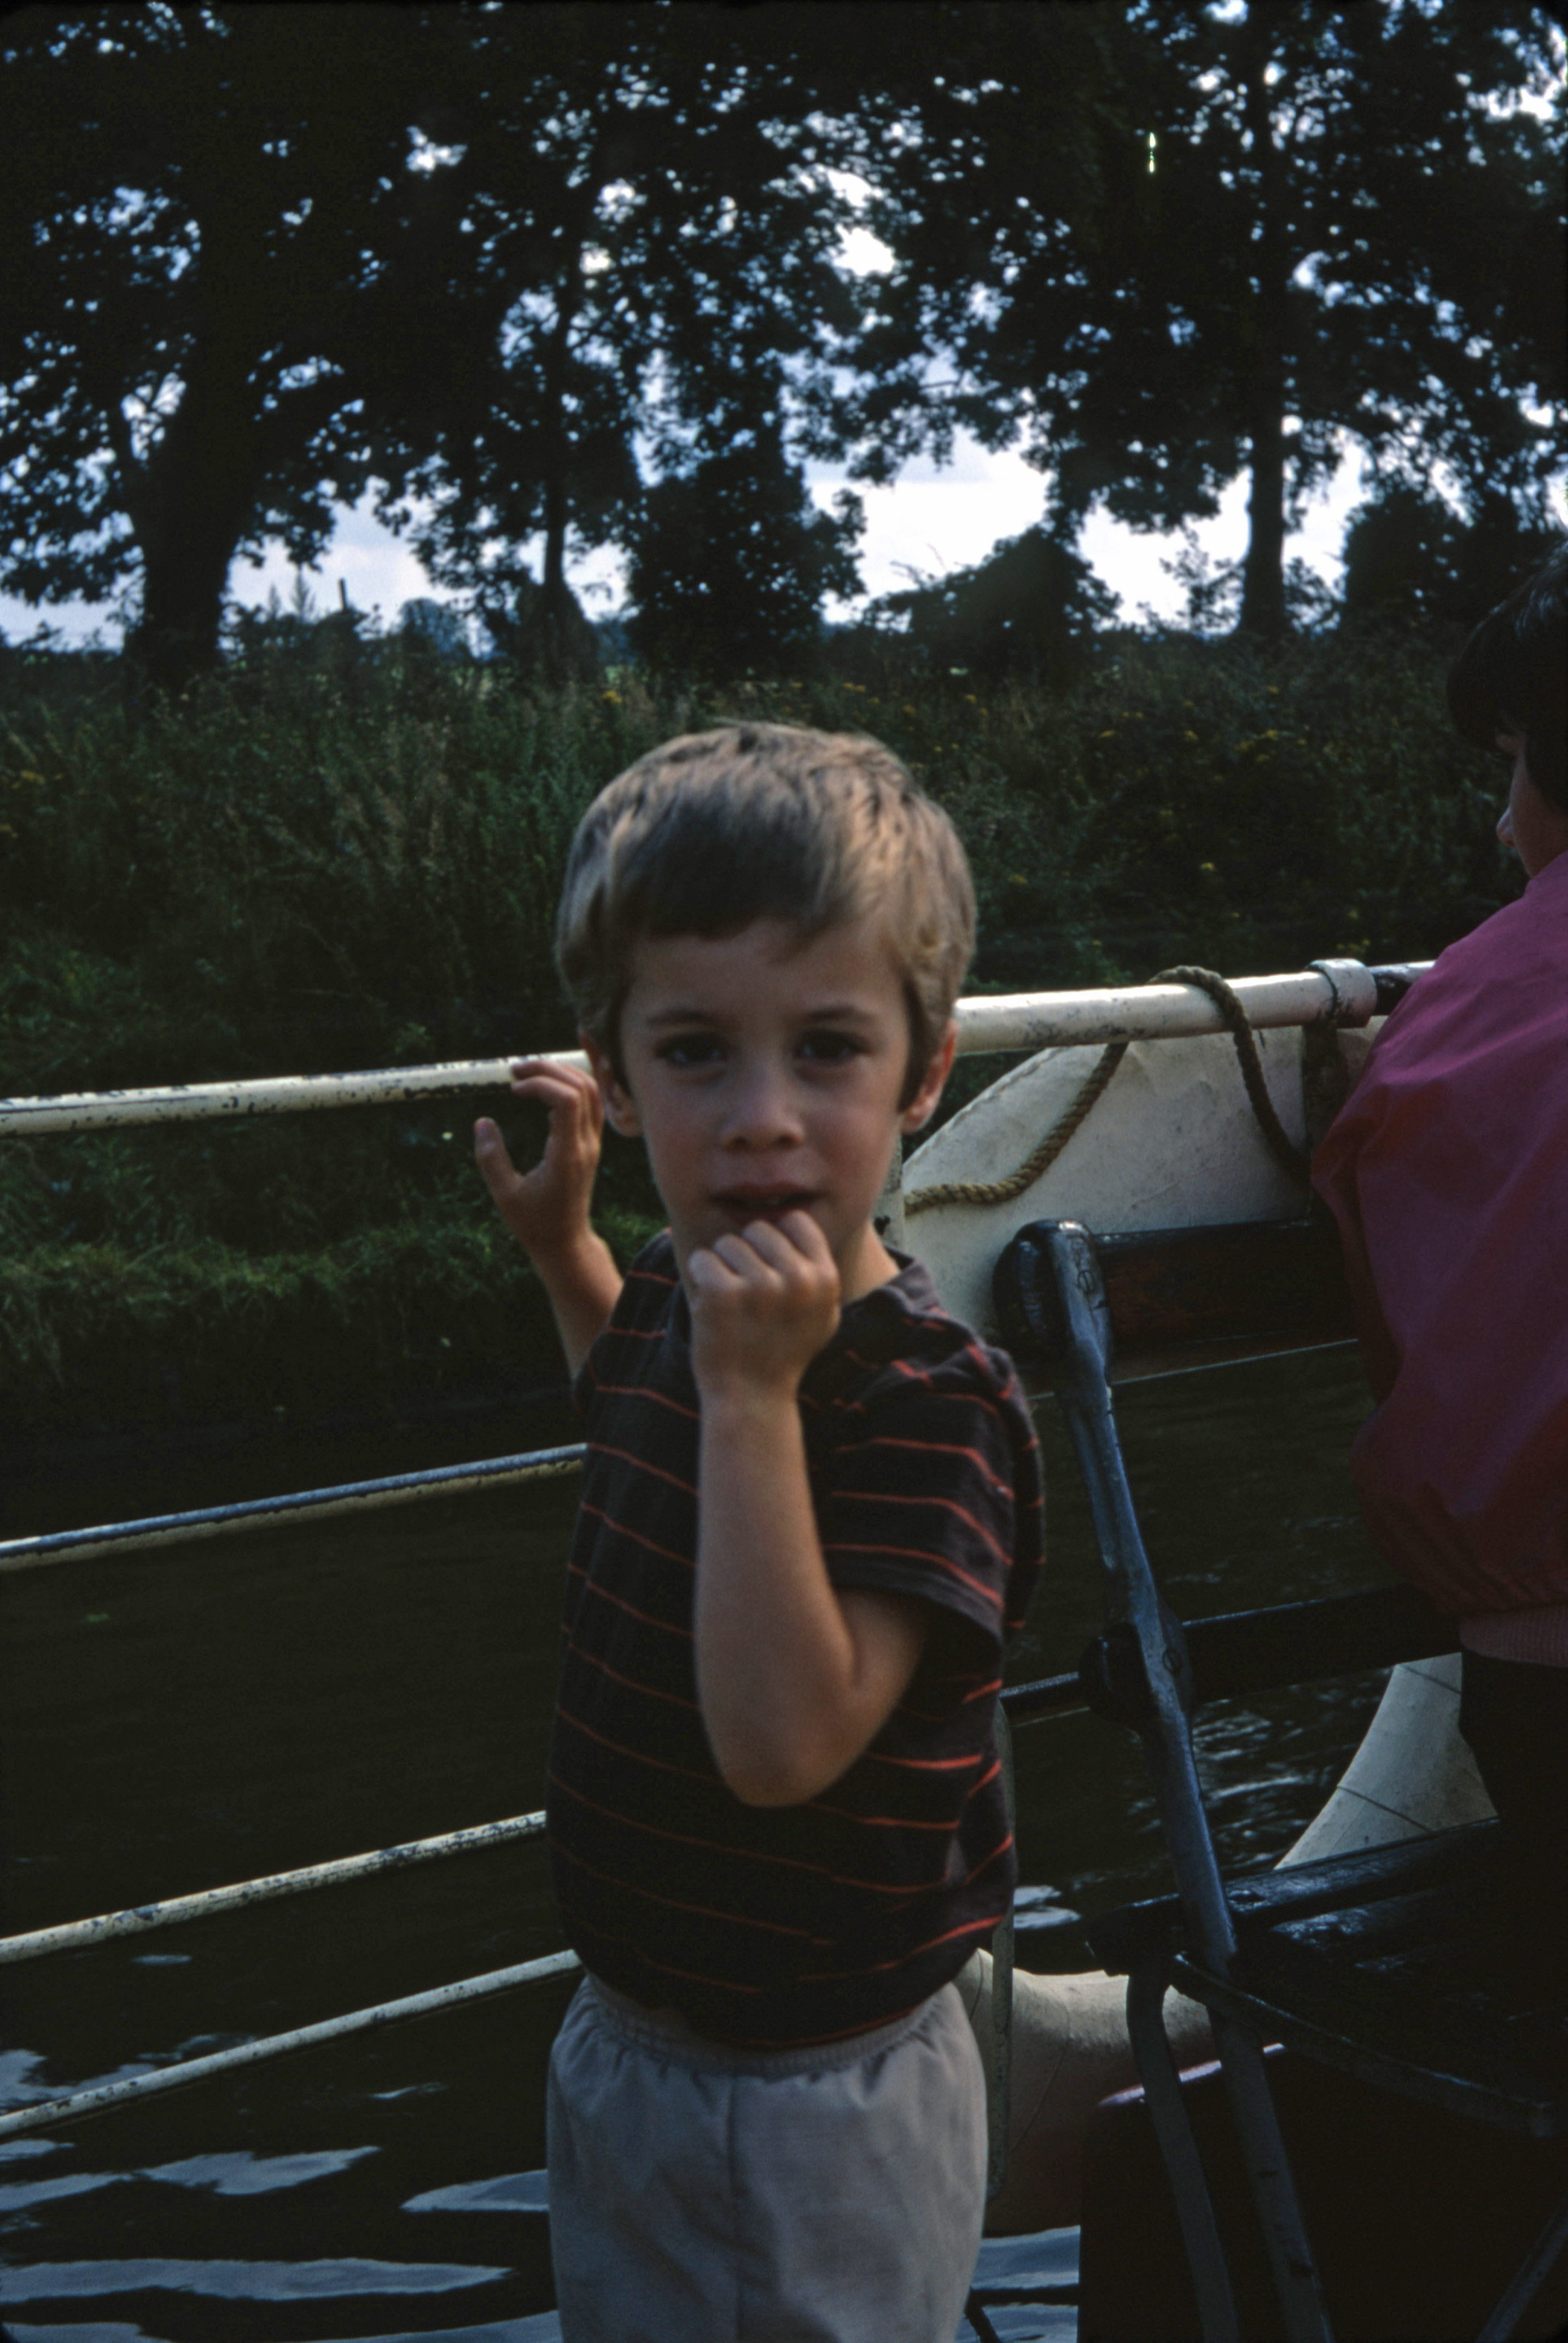 5 Aug 1969 Jonathan's birthday. On a boat at Molesey Lock.